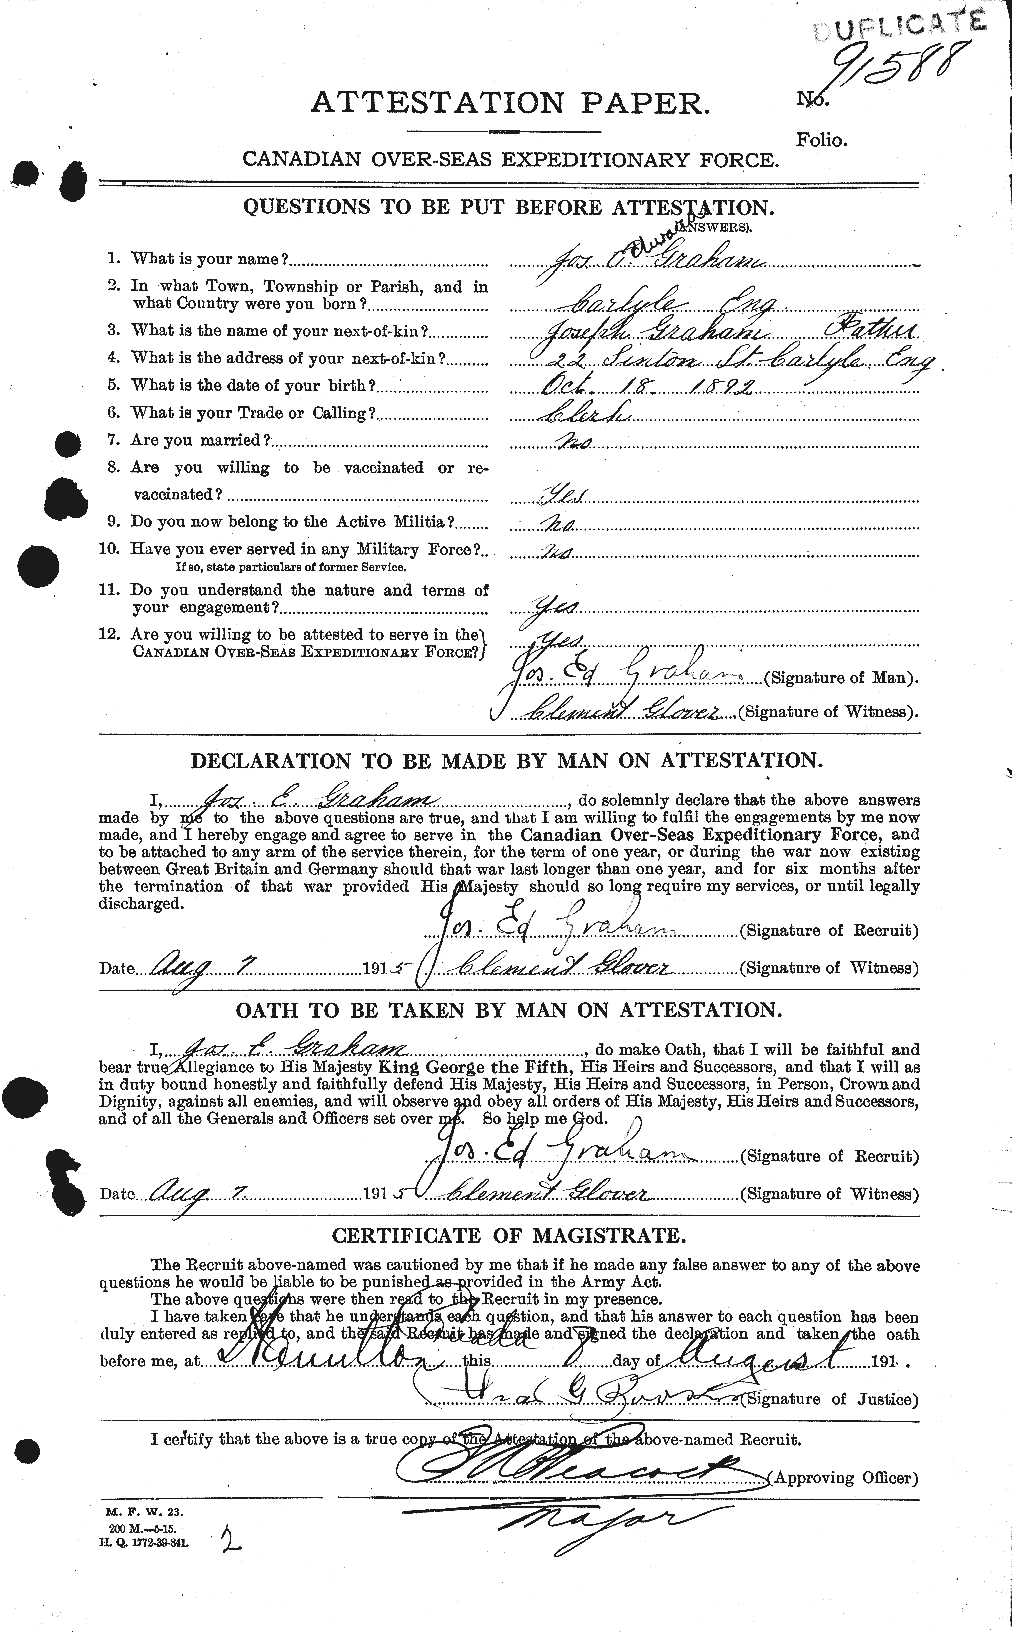 Personnel Records of the First World War - CEF 359244a